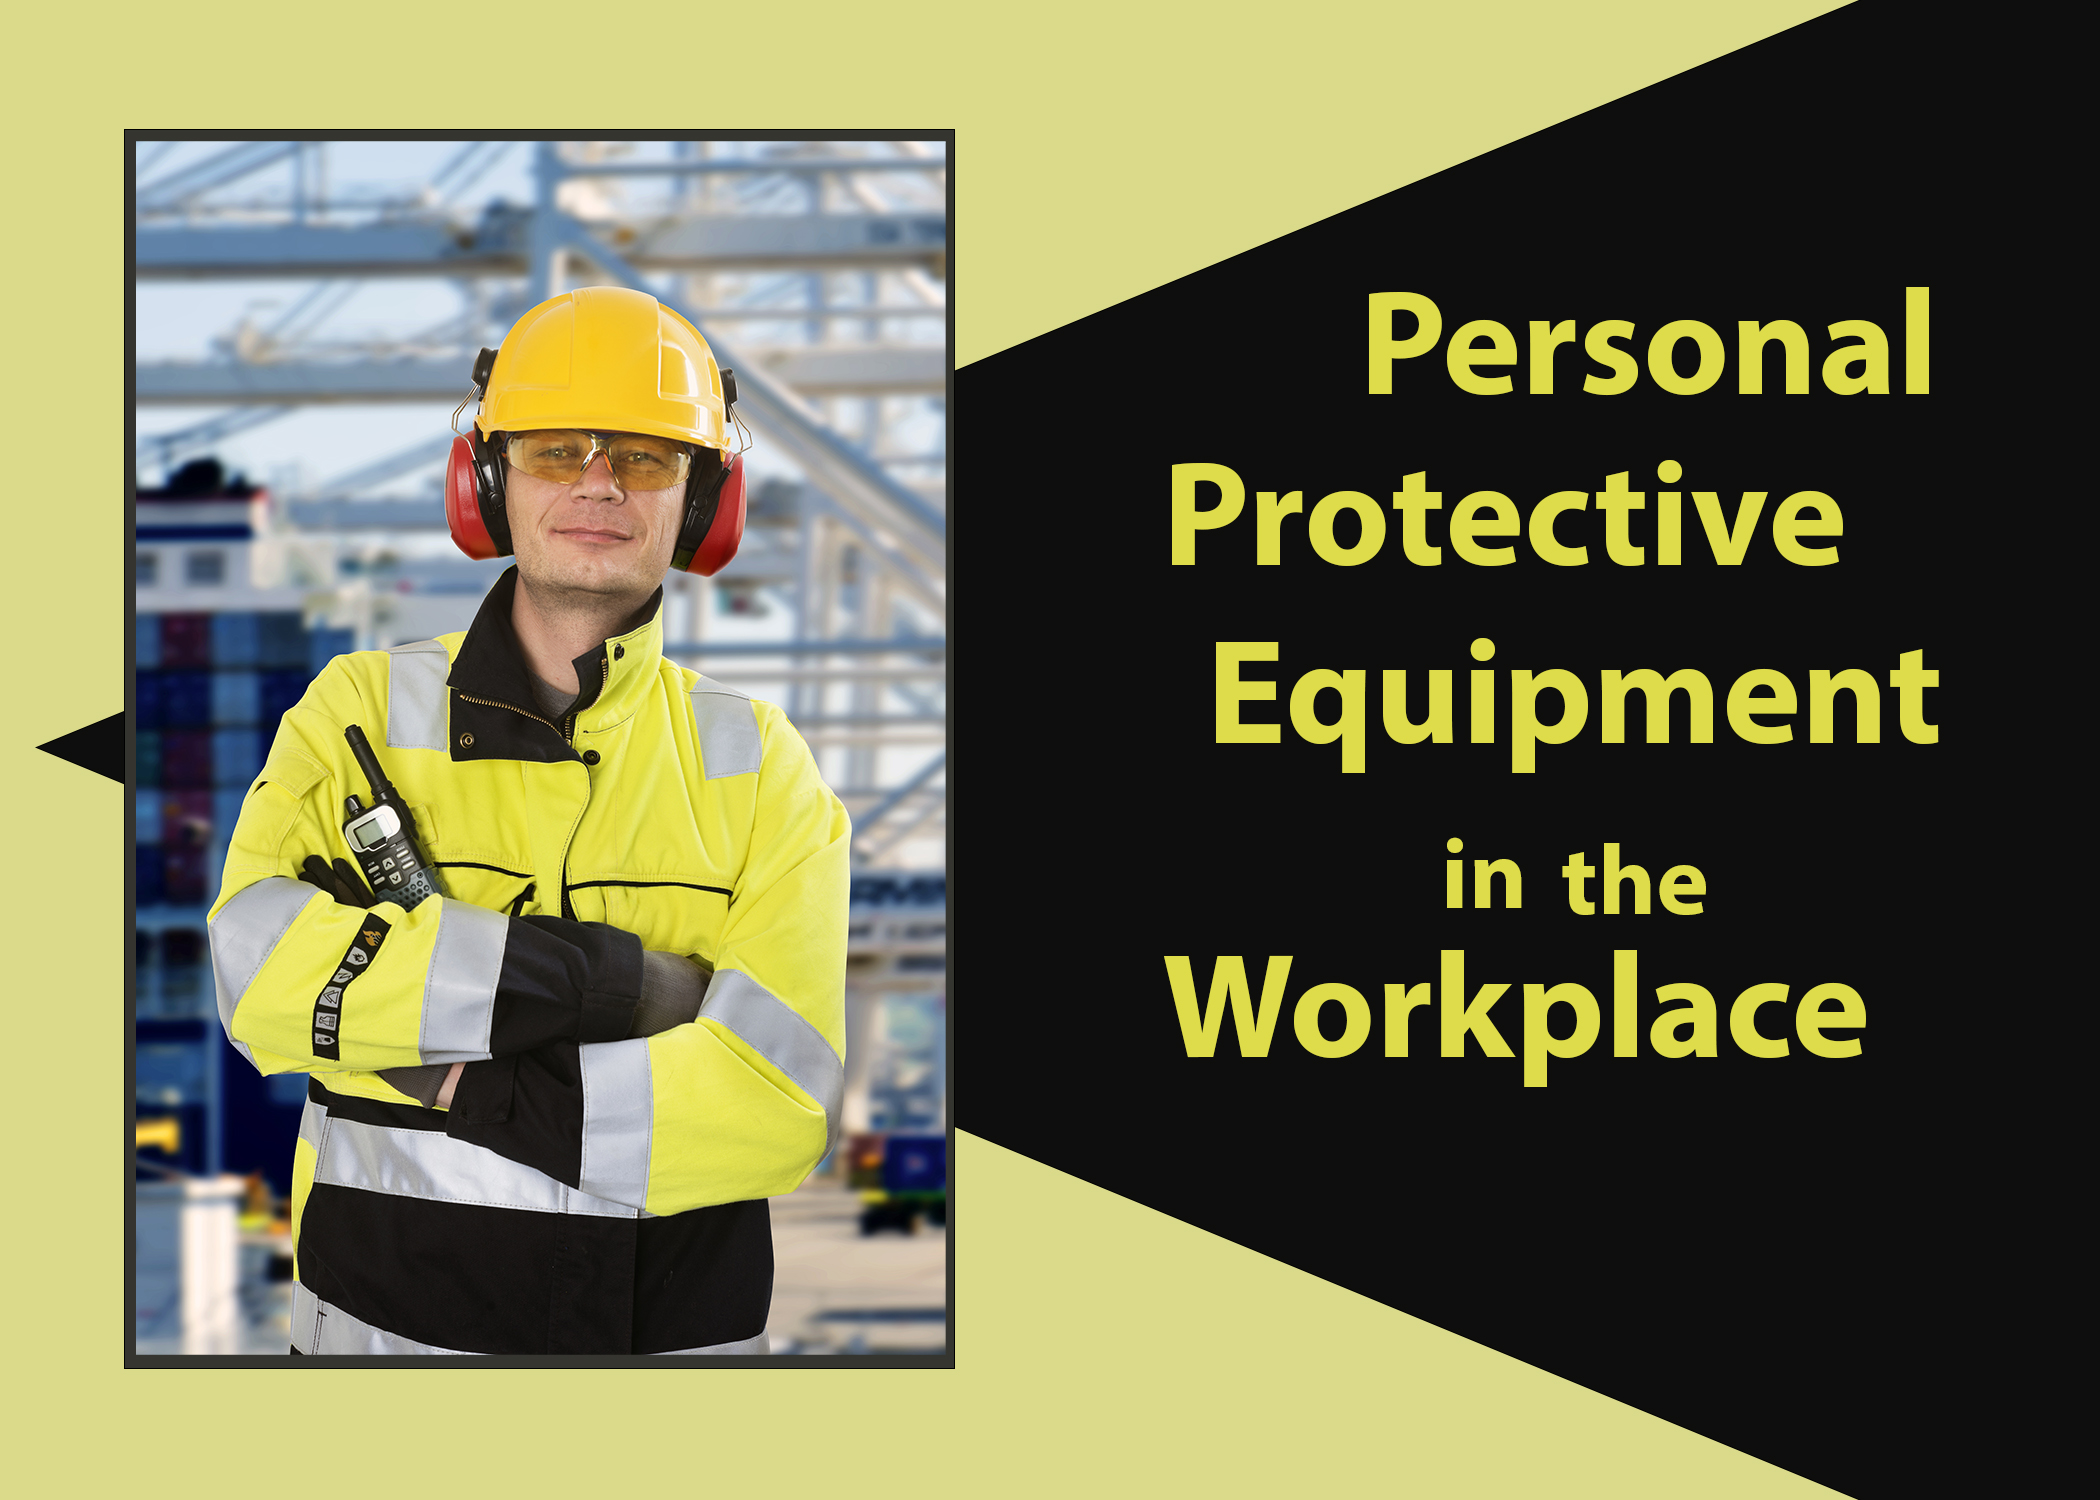 Personal Protective Equipment: Importance and Benefits - Premier Safety